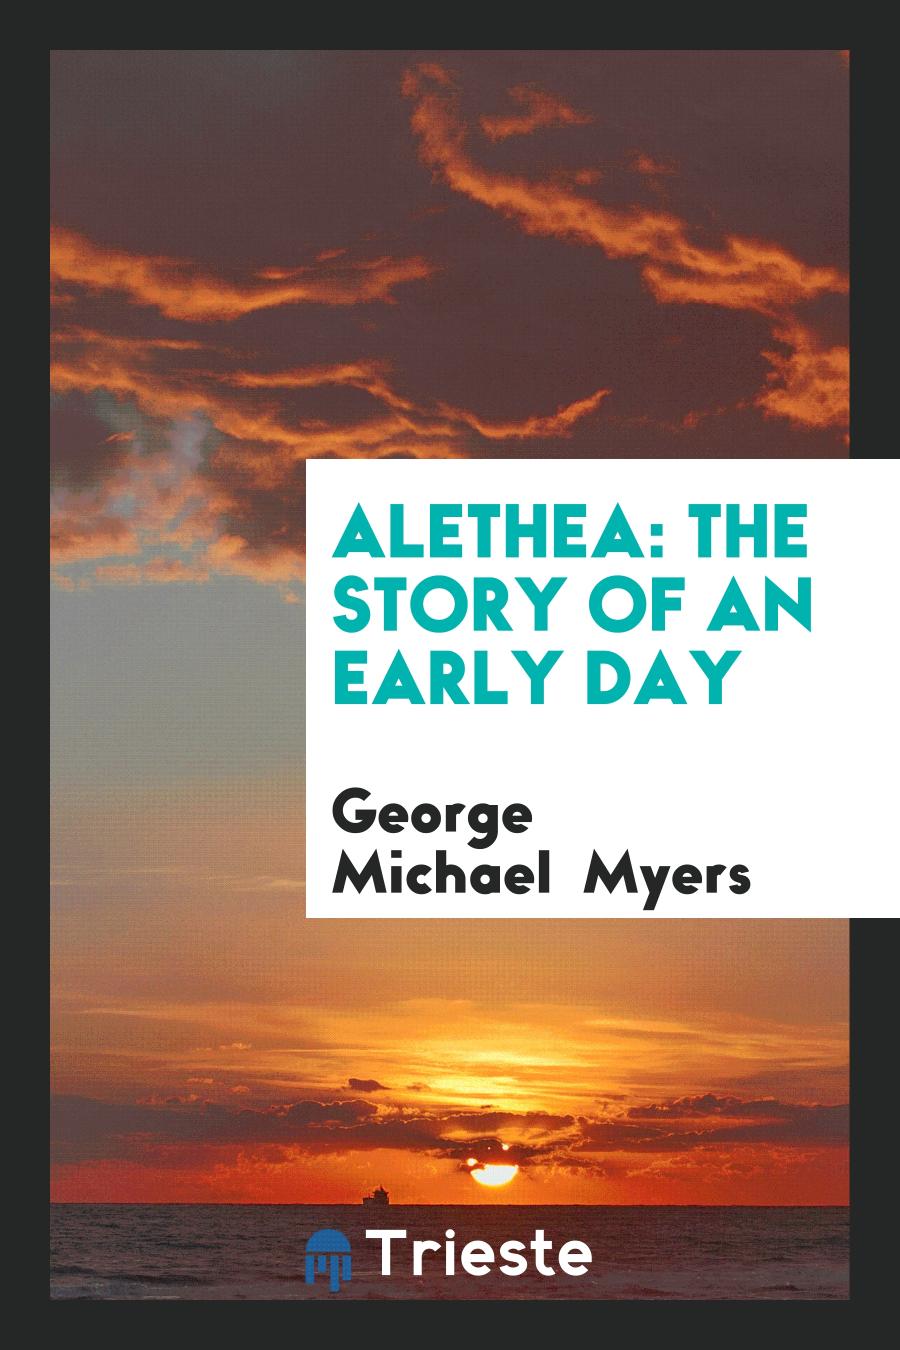 Alethea: The Story of an Early Day